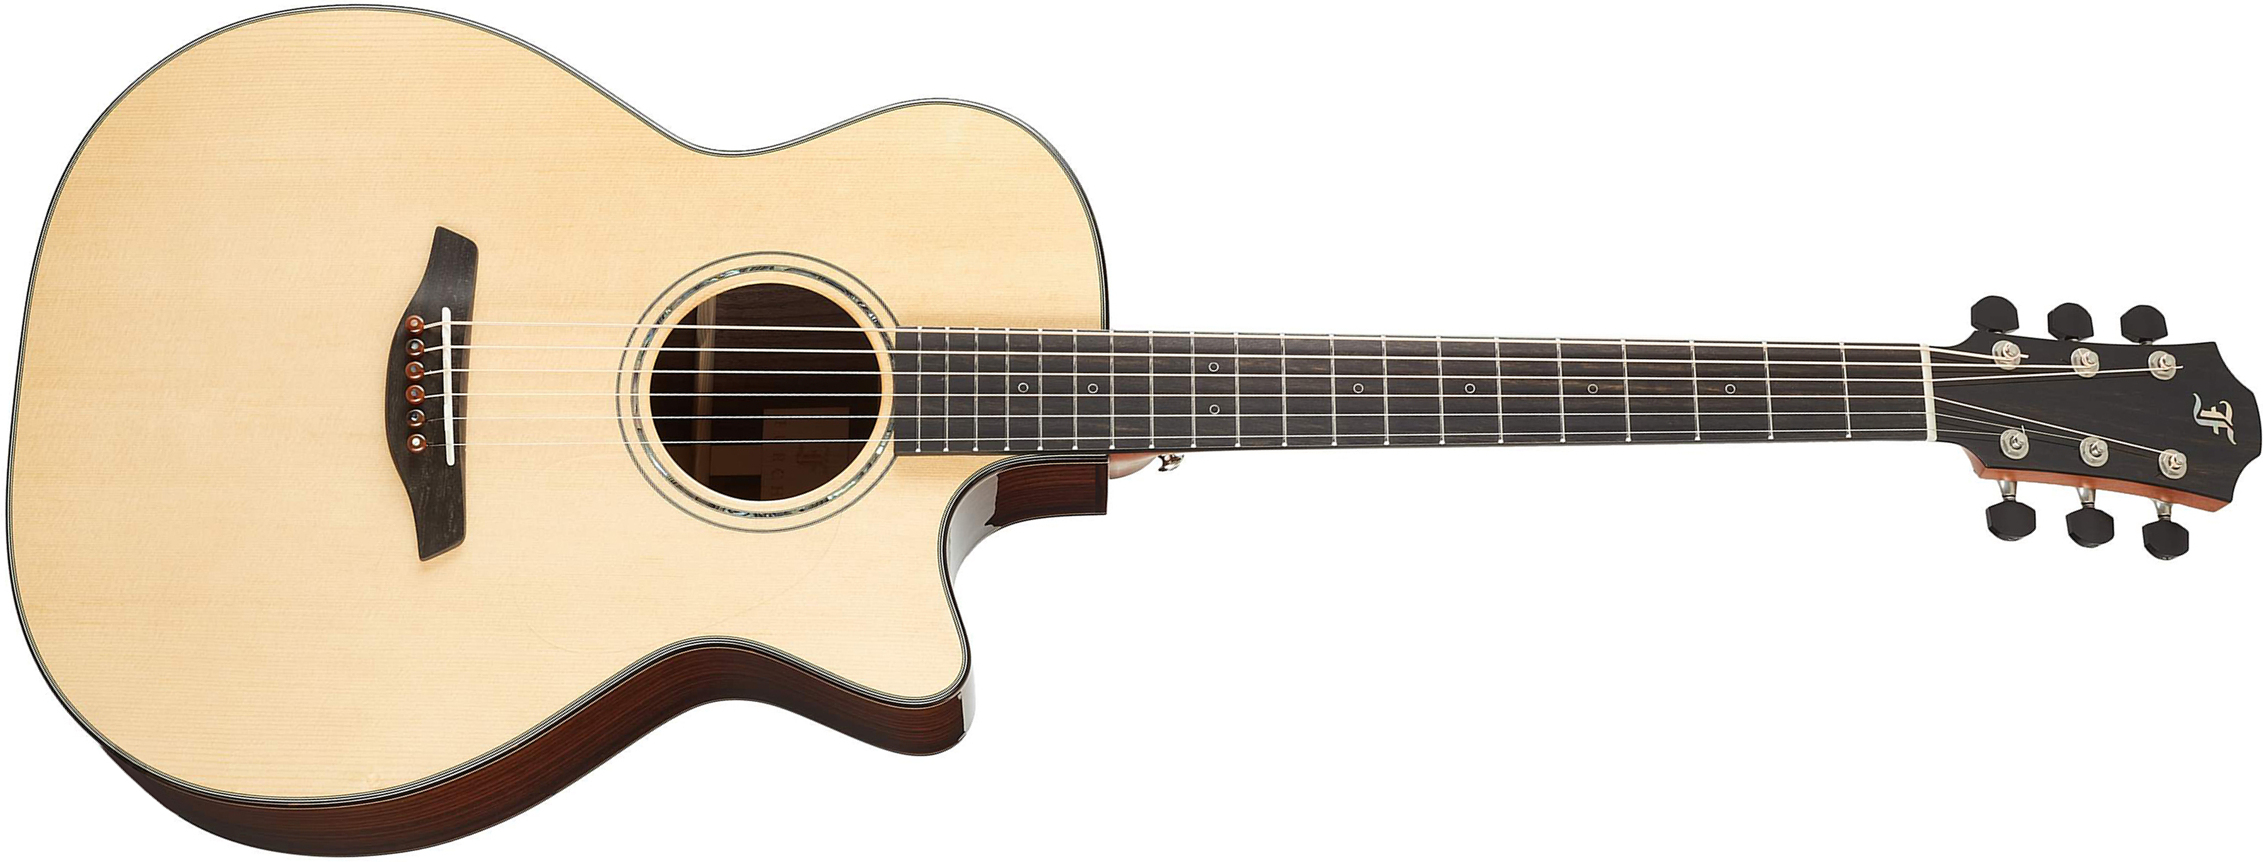 Furch Omc-sr Lrb1 Yellow Orchestra Model Epicea Palissandre Eb - Natural Full-pore - Electro acoustic guitar - Main picture